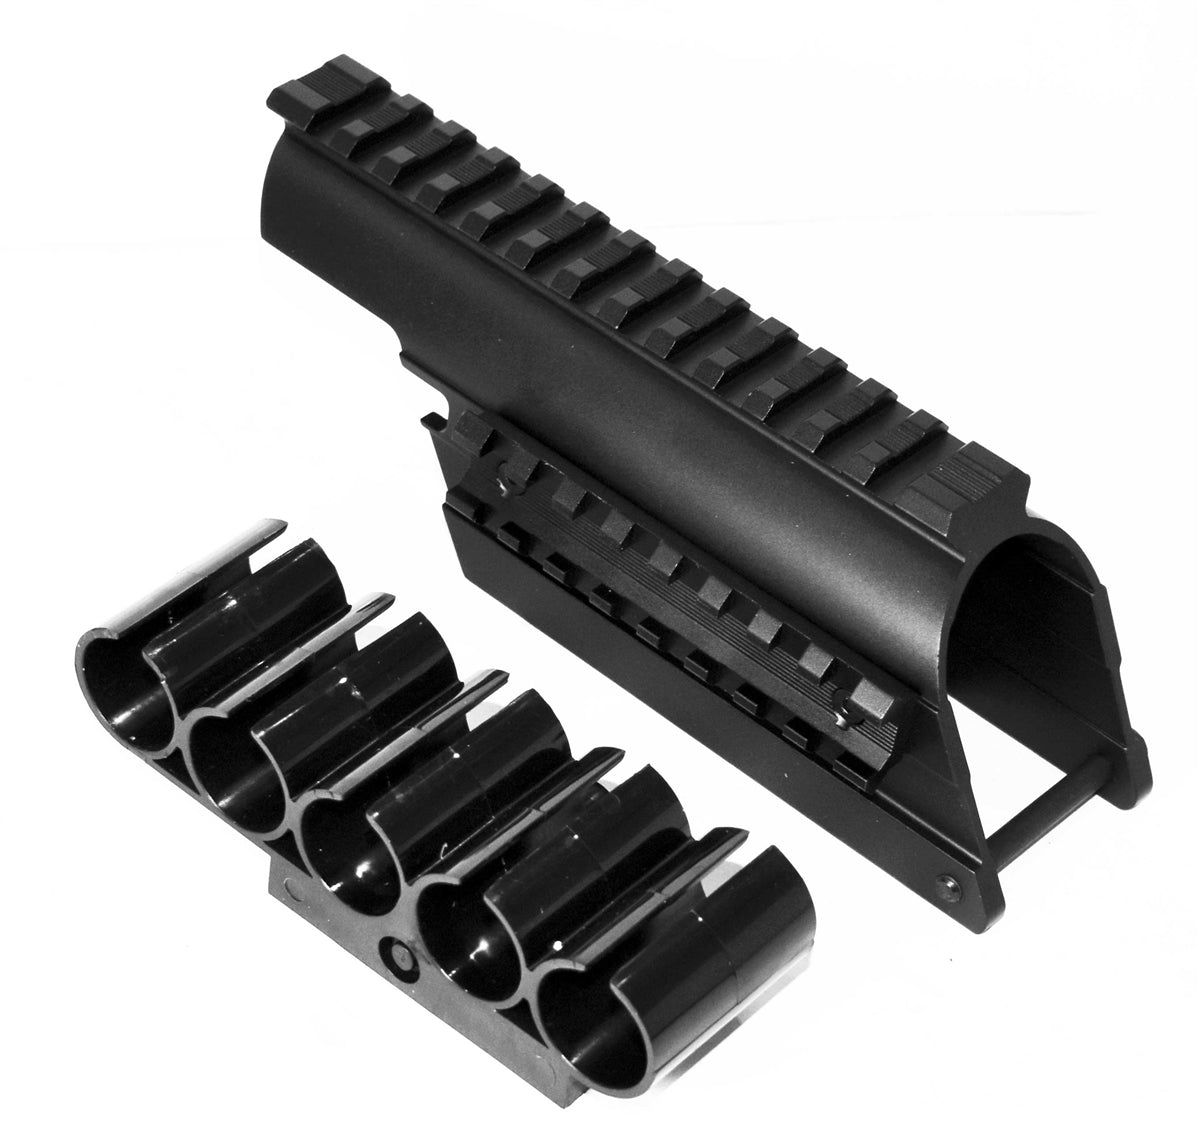 Trinity Saddle Mount Picatinny Rail Adapter For Mossberg 500 12 Gauge Pump.